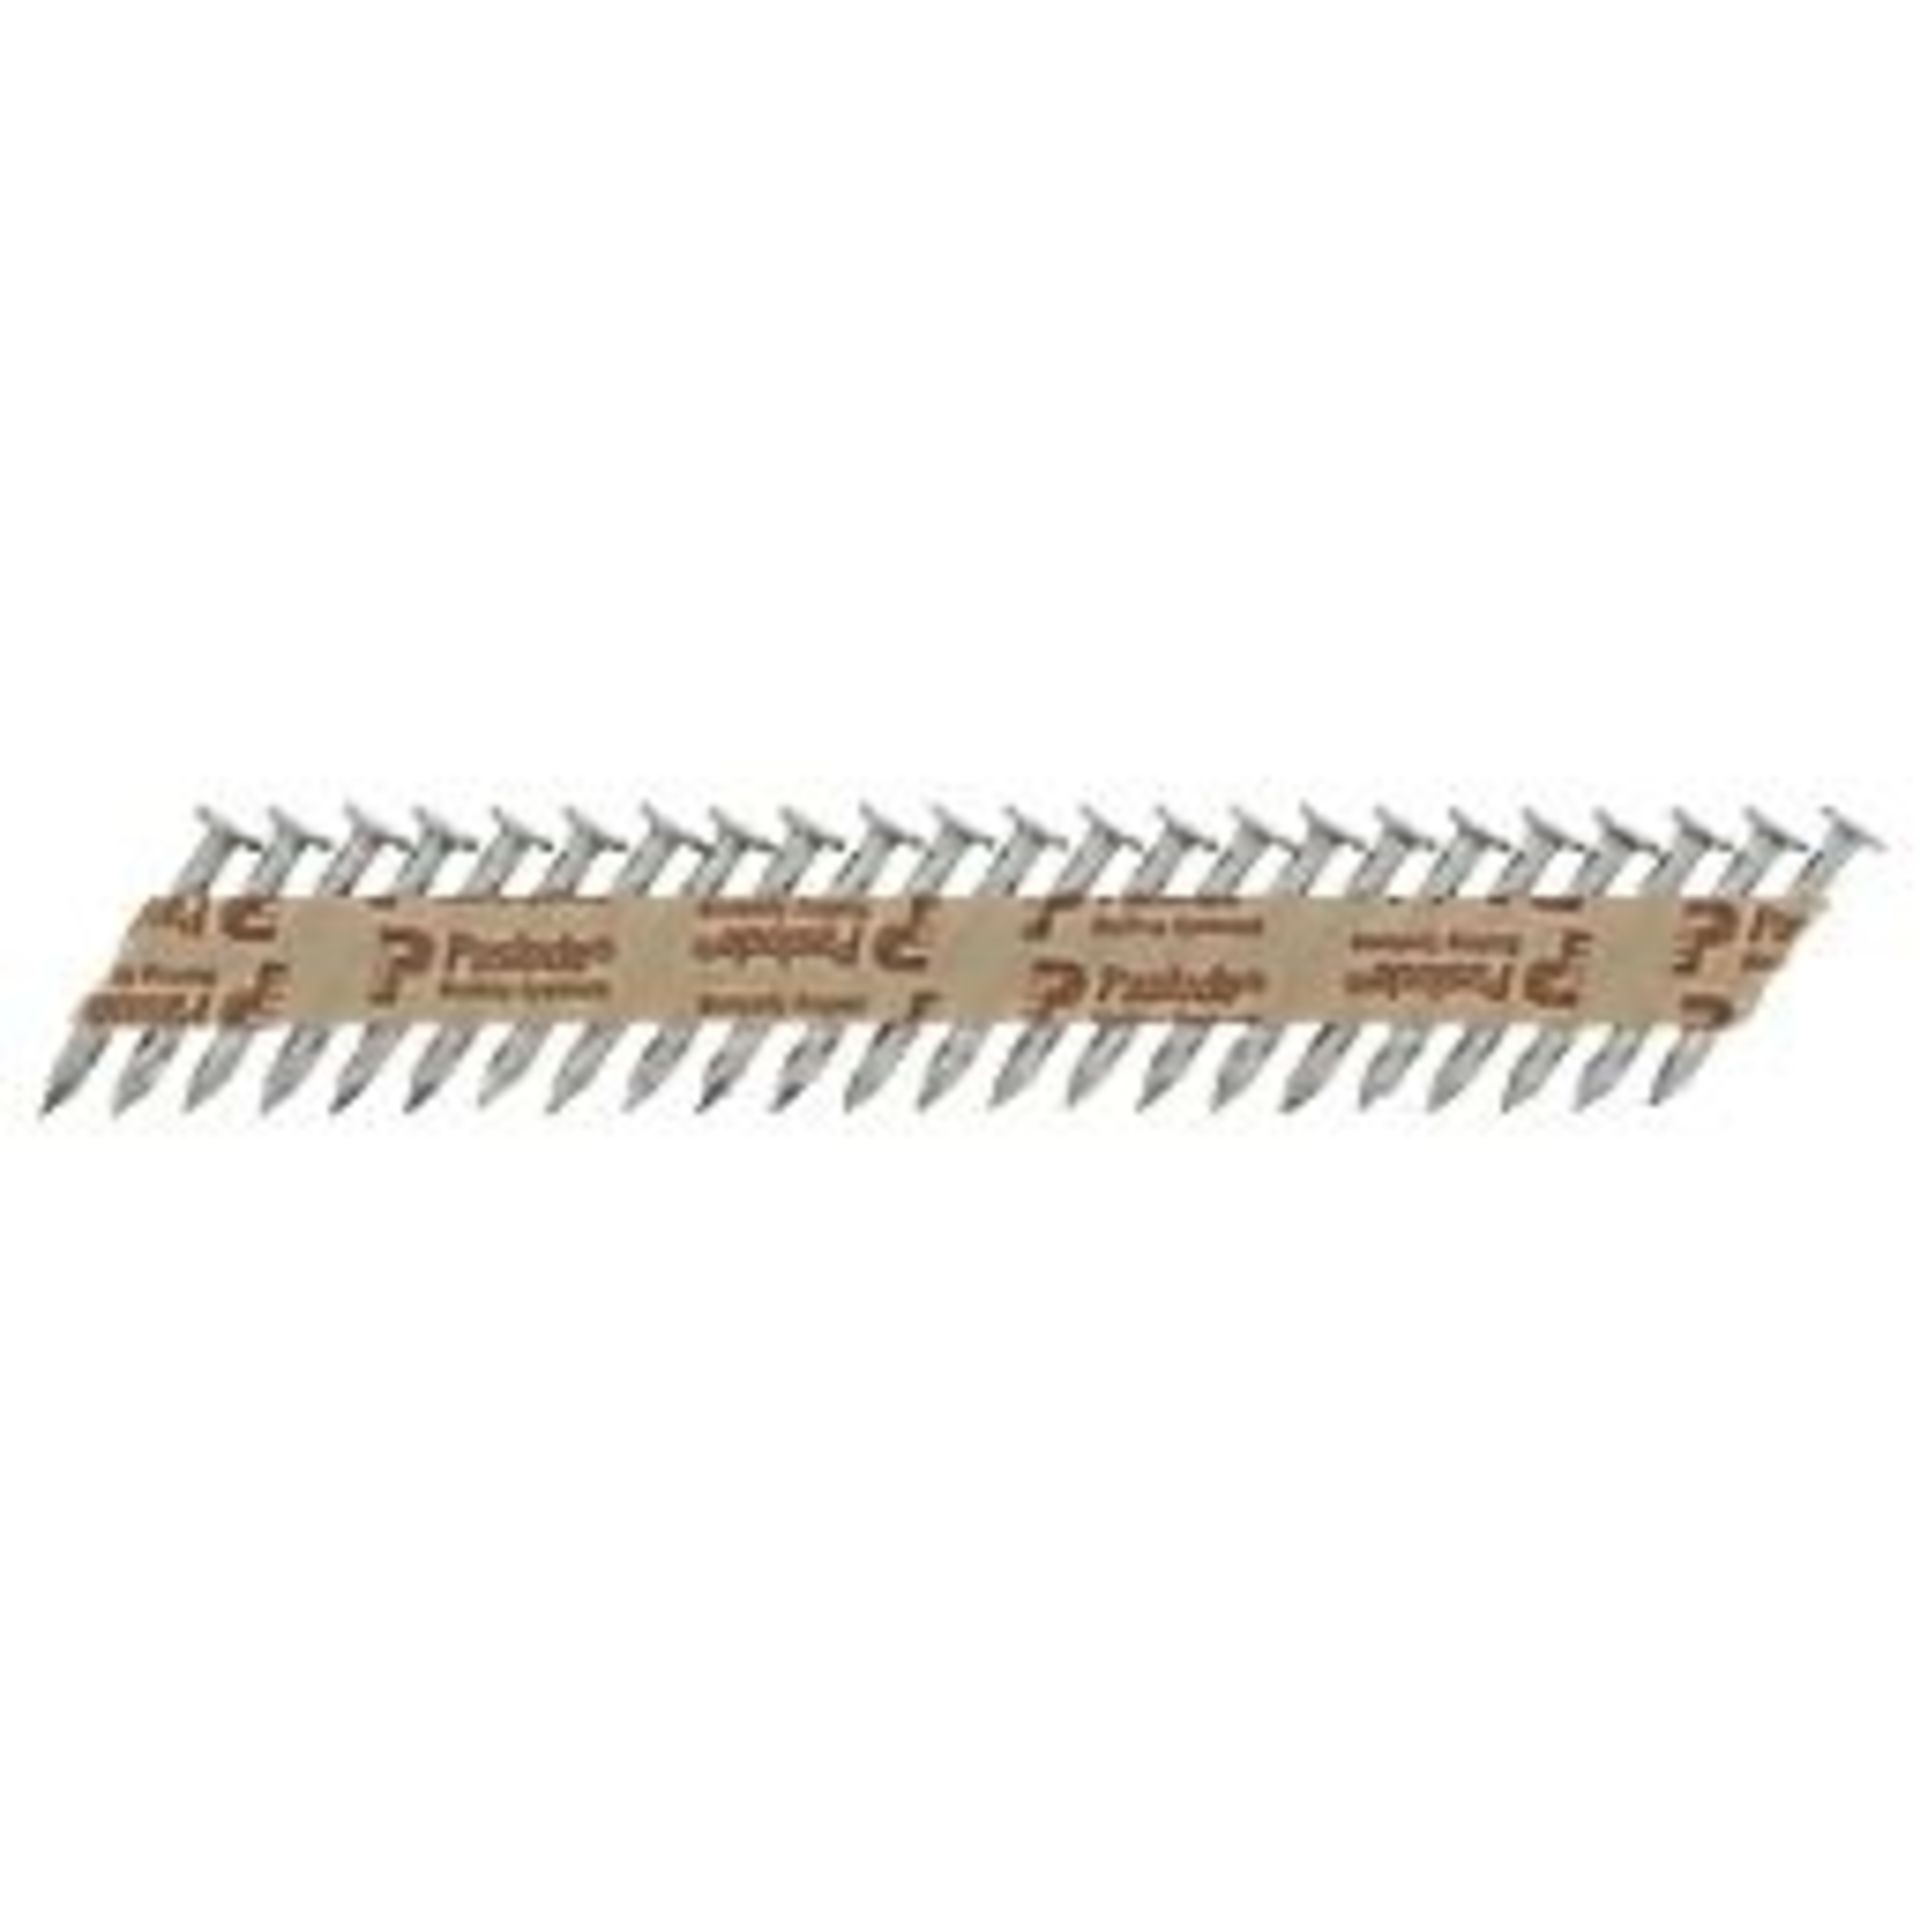 PASLODE GALVANISED PPN35CI COLLATED NAILS 3.4MM X 35MM 2500 PACK. - ER46. RRP £149.99 each.